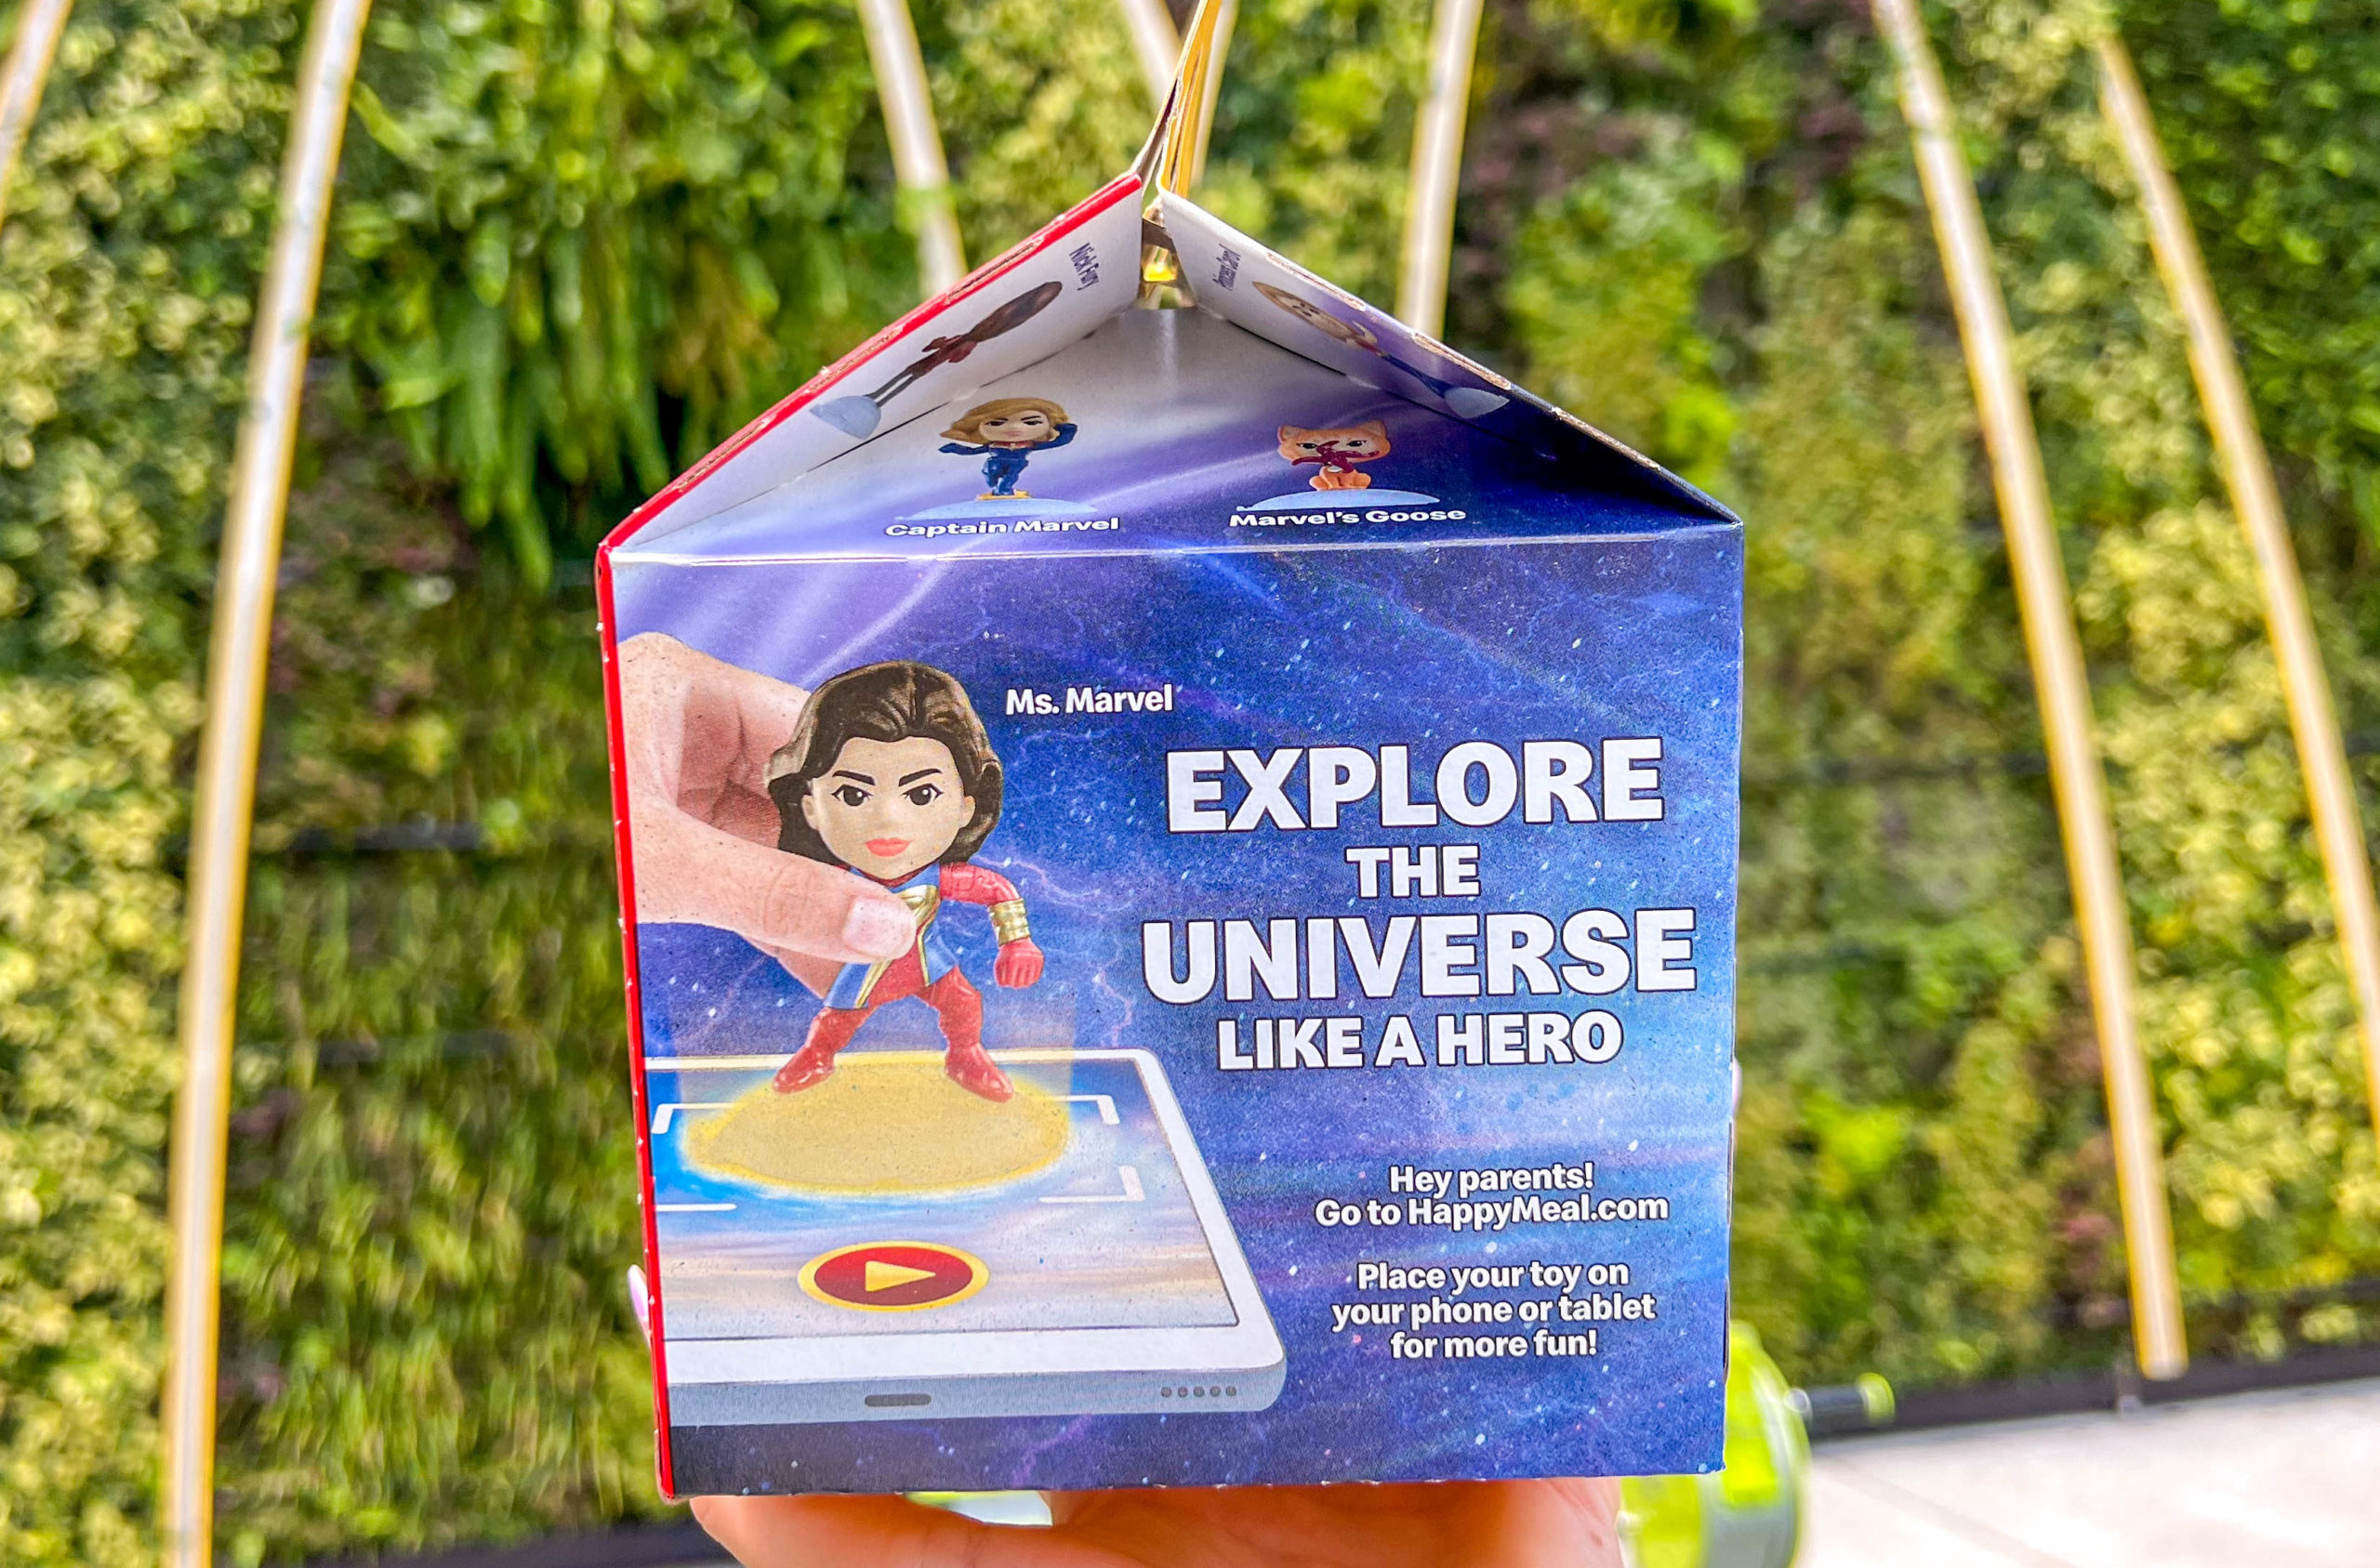 'The Marvels' McDonald's Happy Meal